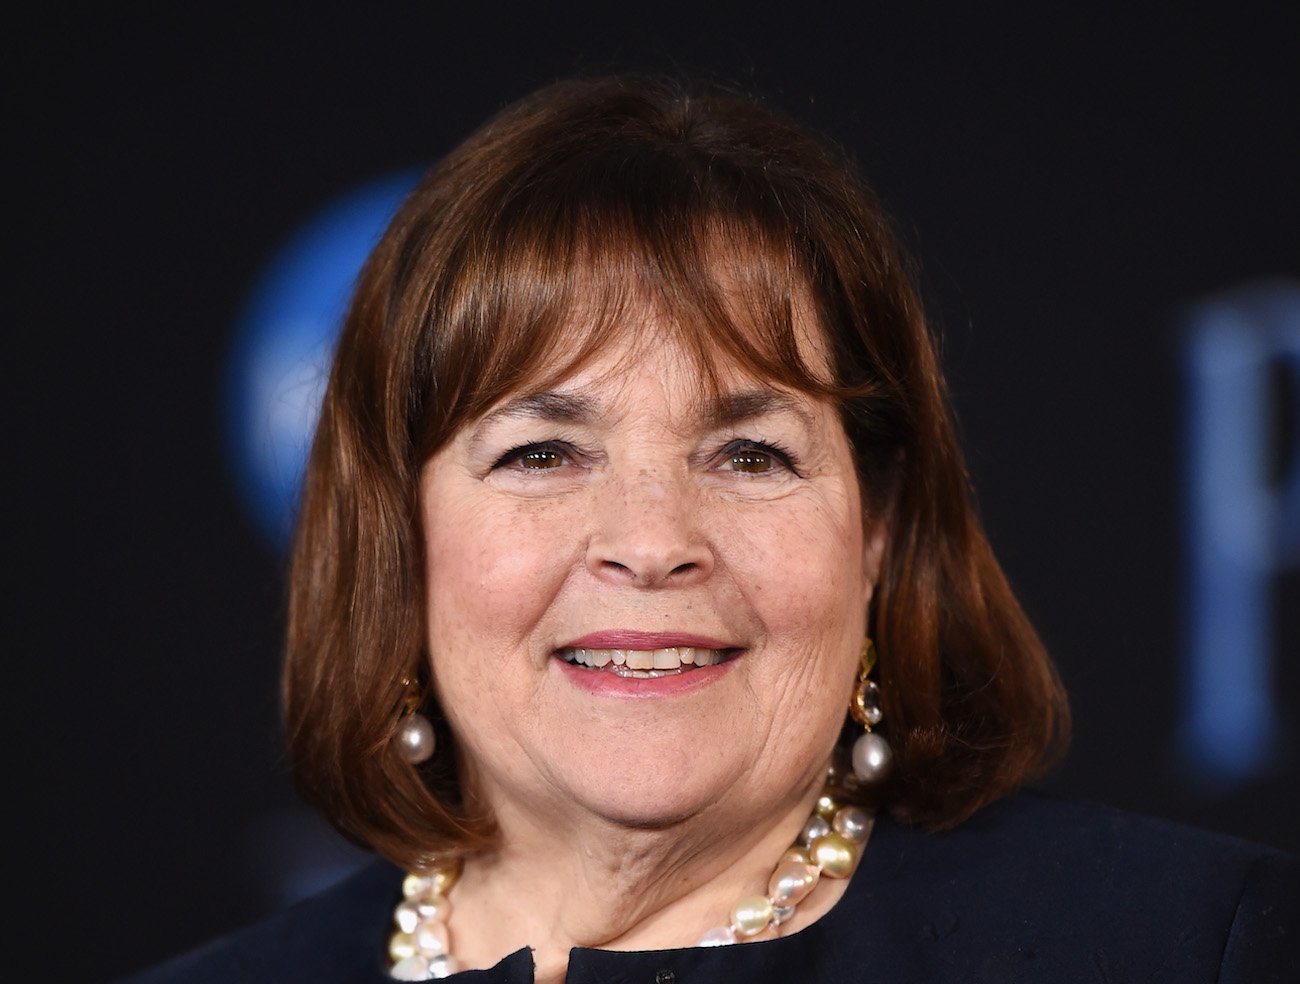 Ina Garten smiles wearing a black top and pearl necklace